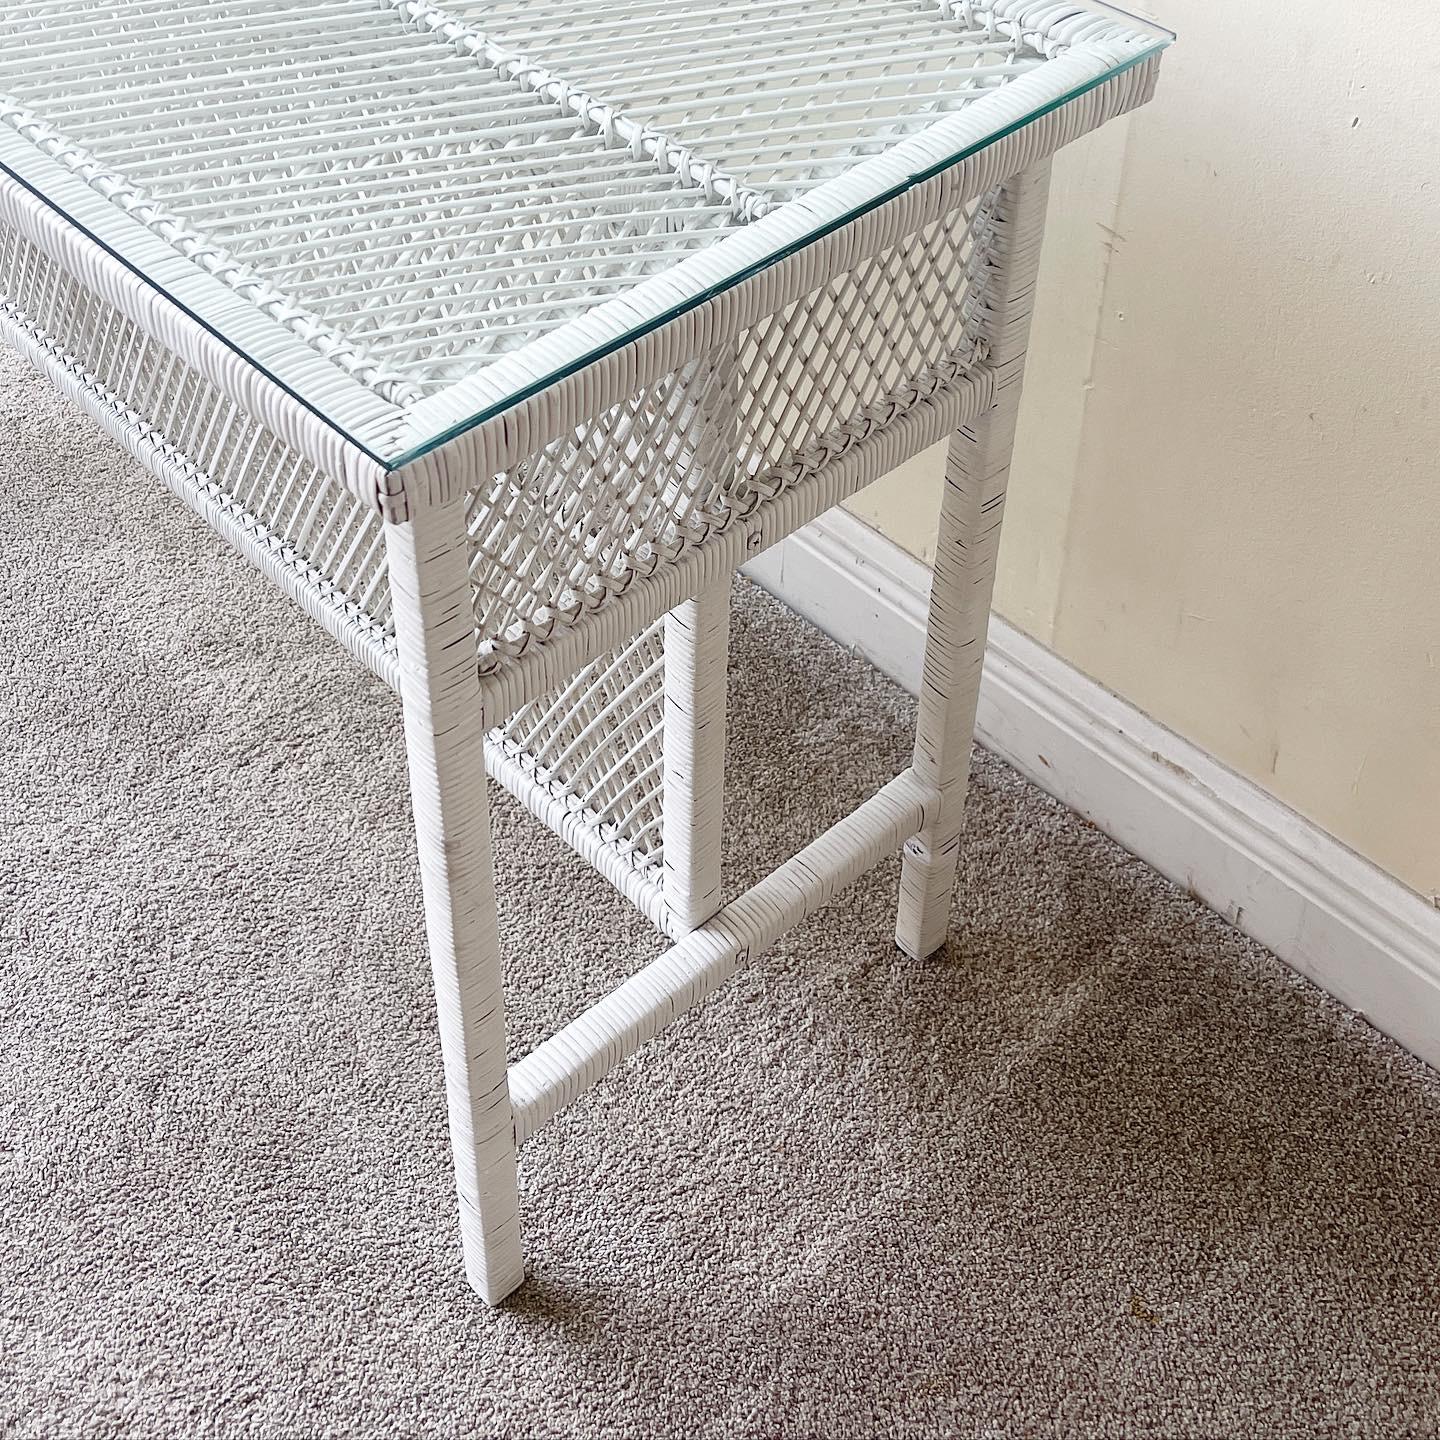 Bohemian Boho Chic White Rattan Console Table With Glass Top